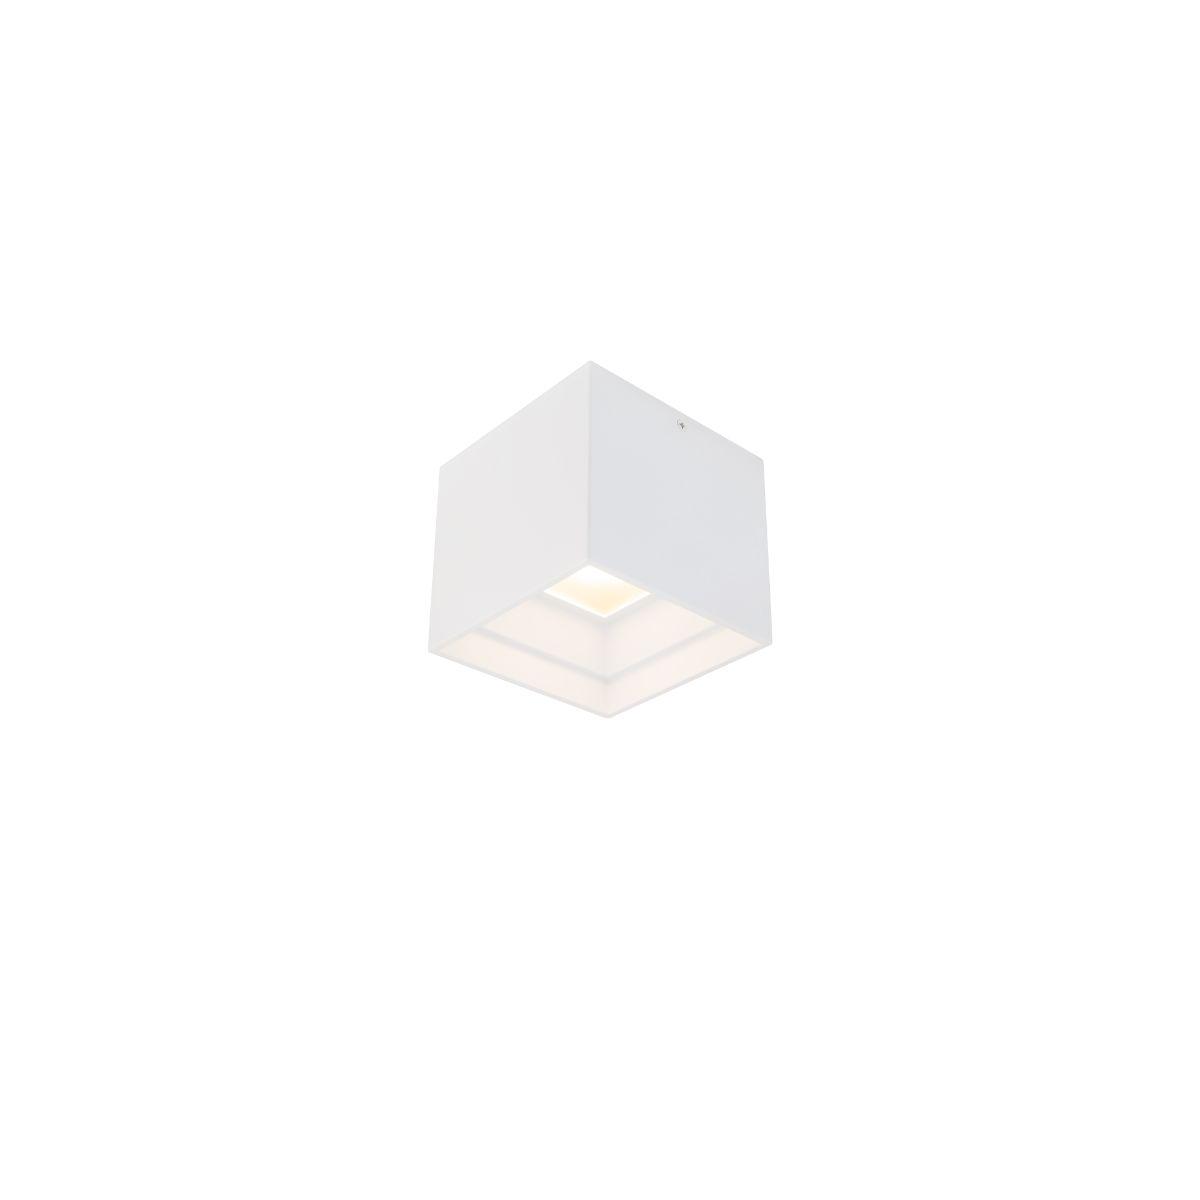 DOWNTOWN 5 in. Square LED Outdoor Flush Mount